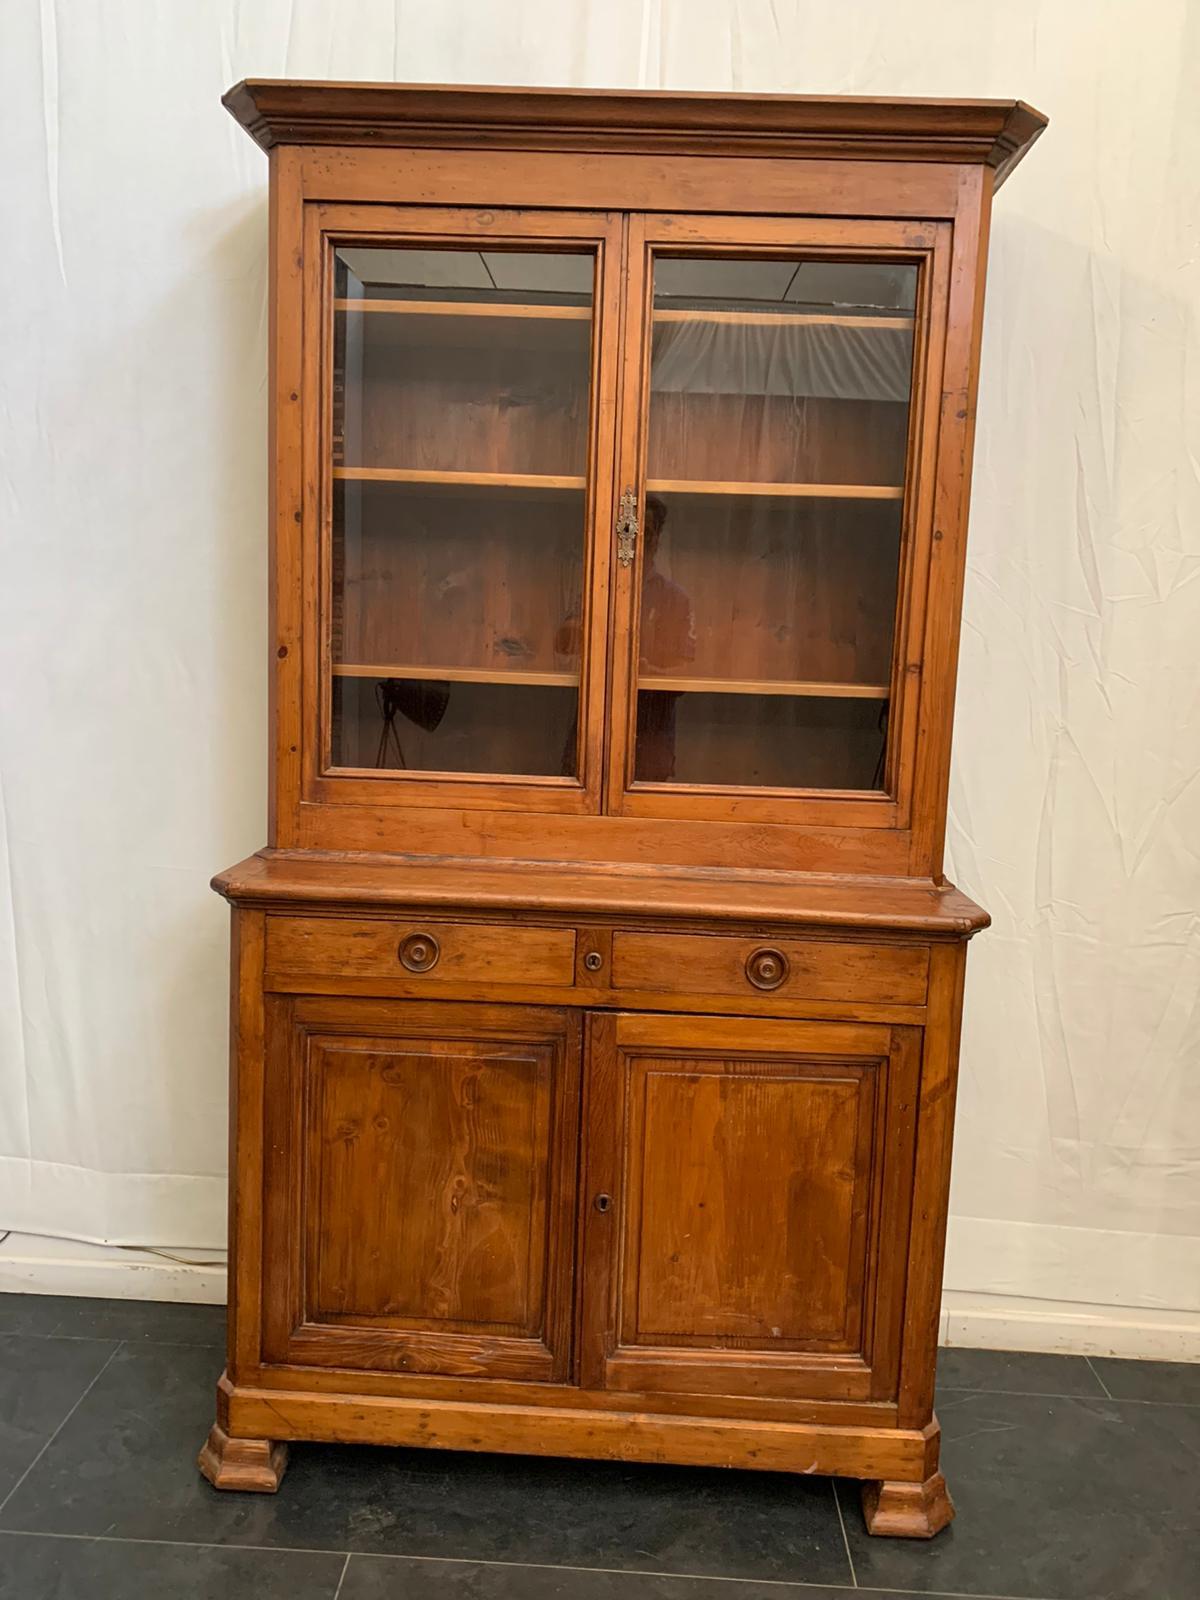 Fir Antique Italian Pinewood Cabinet For Sale